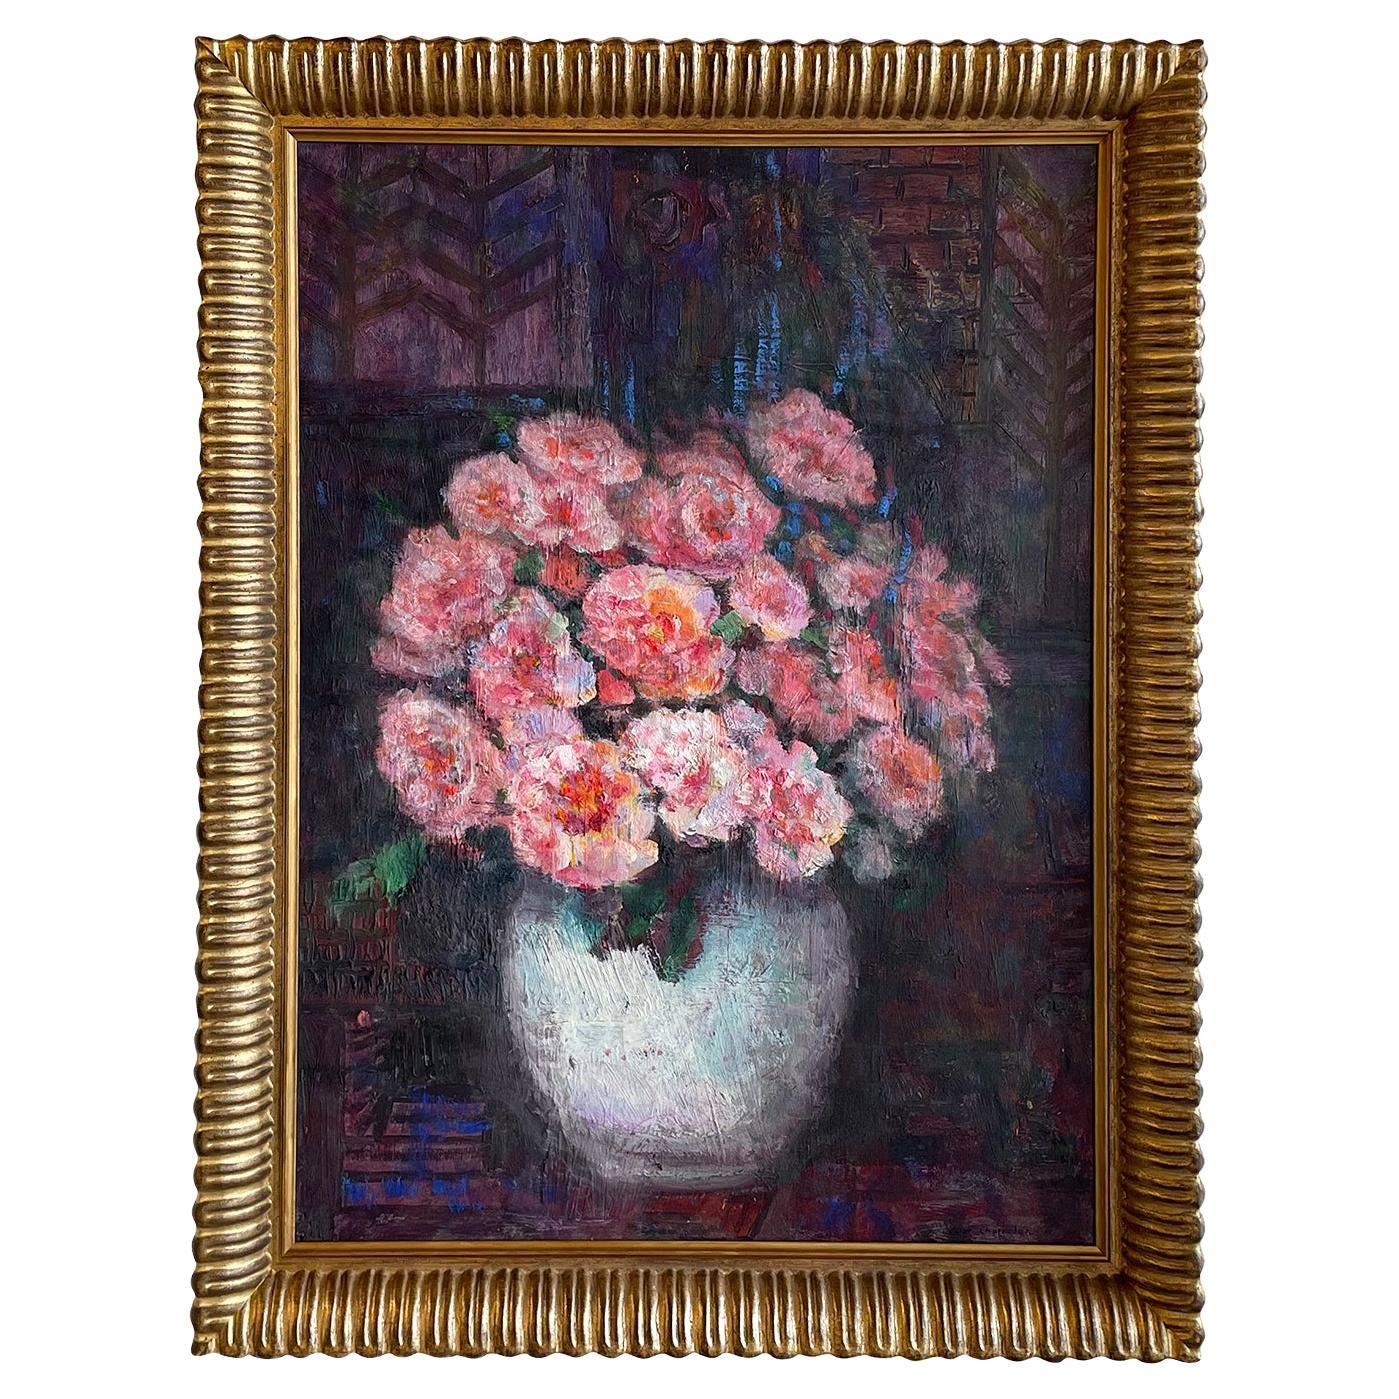 20th Century French Oil Painting of a Vase with Pink Flowers by Victor Charreton For Sale